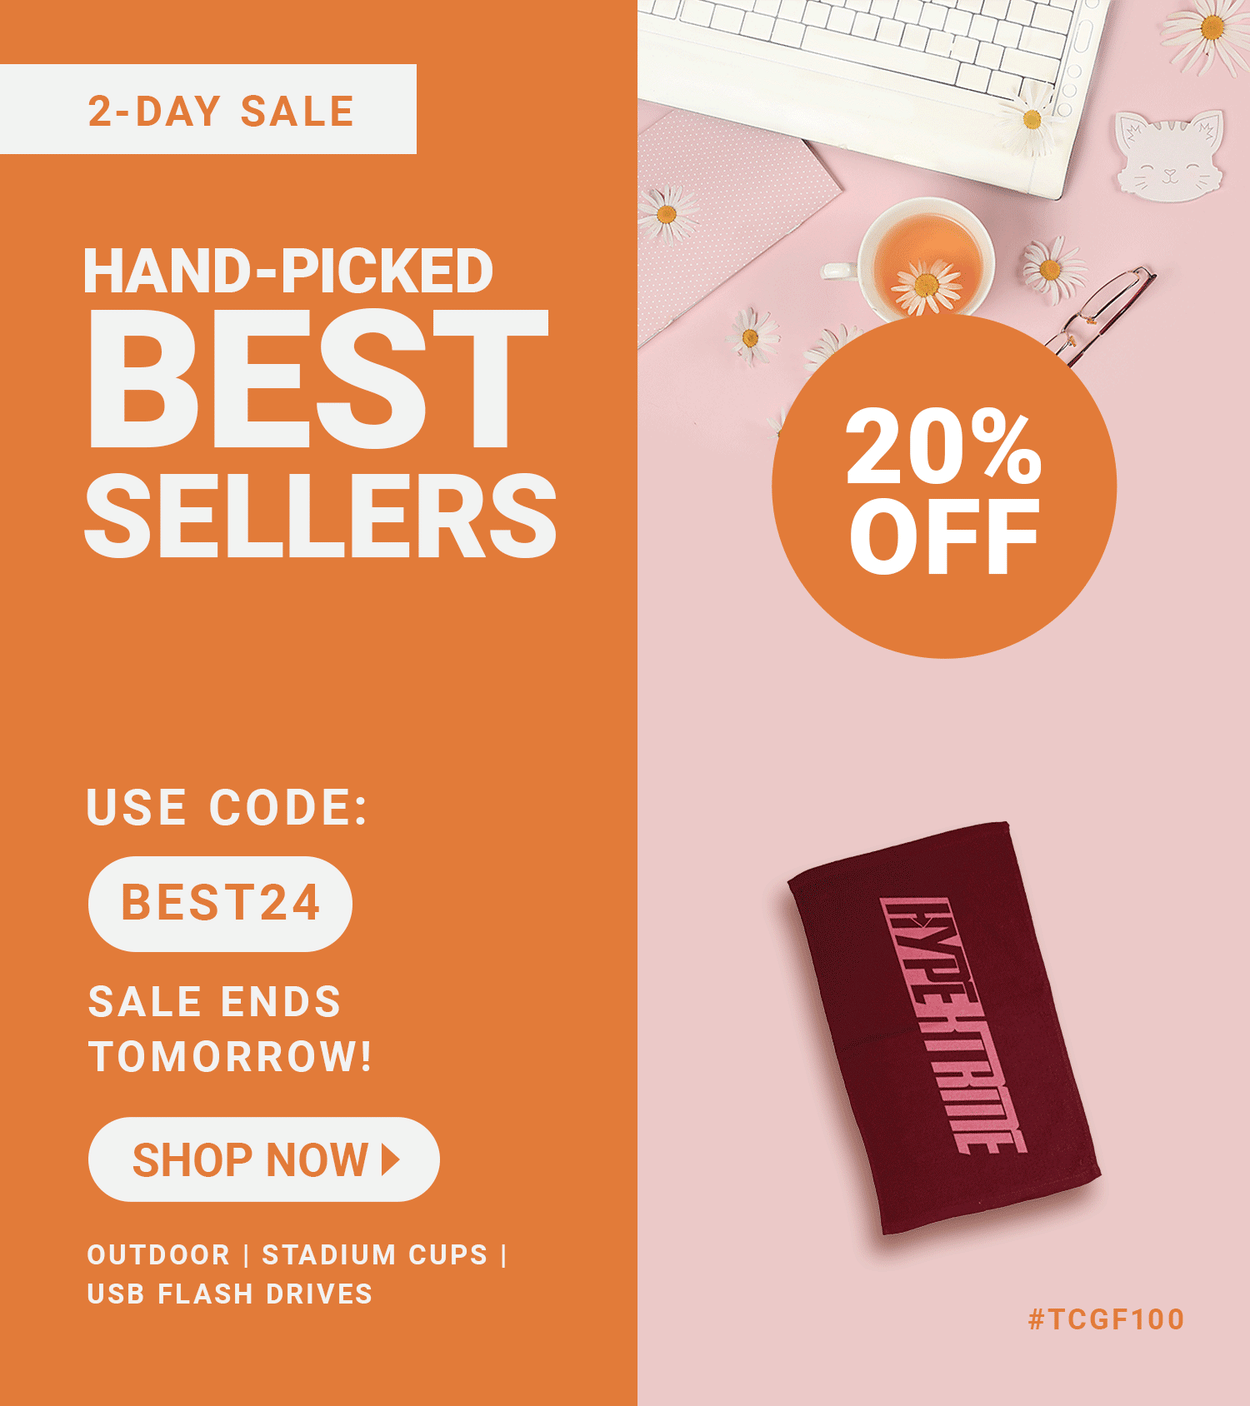 Hand-Picked Best Sellers | 20% Off | Use Code: BEST24 | Shop Now | Discount applied to glassware, ceramic mugs and stress balls.